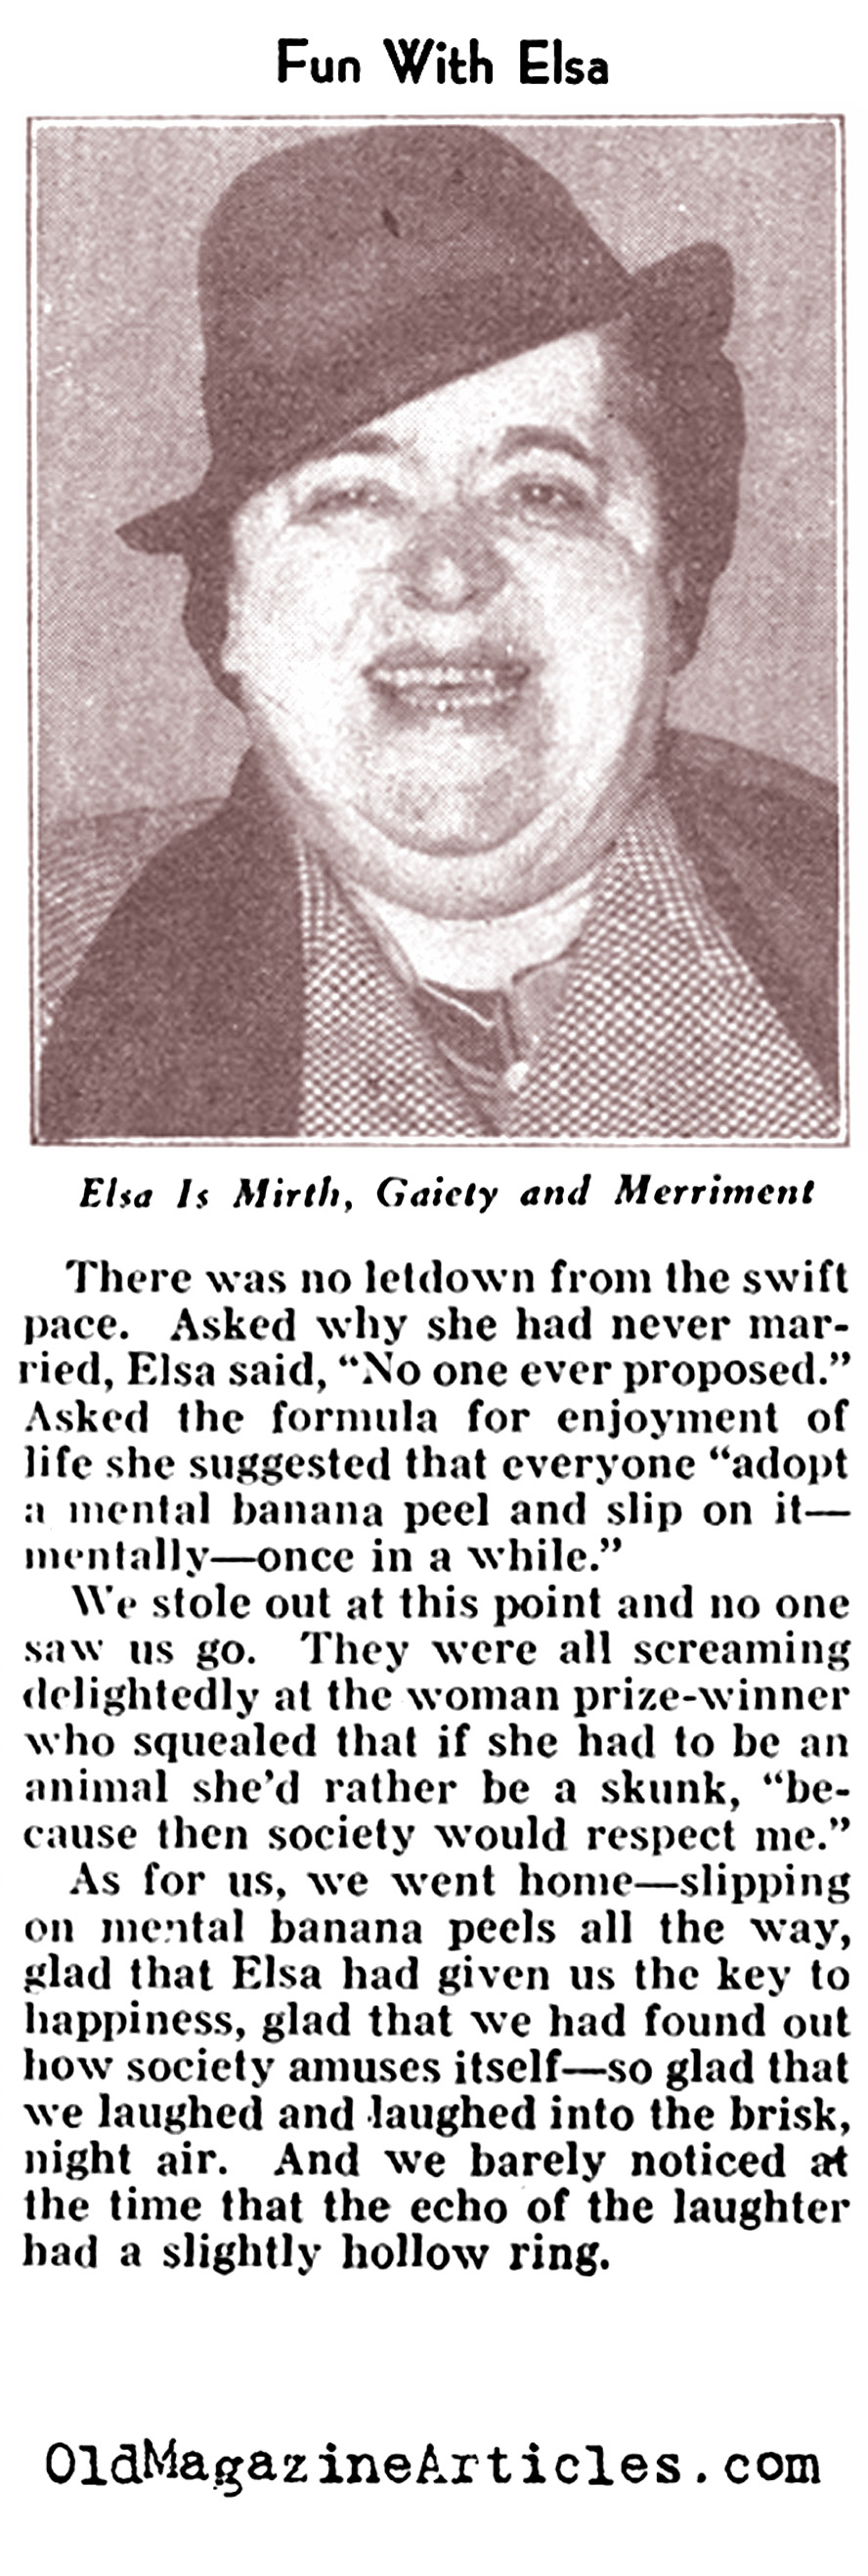 Elsa Maxwell: Life of the Party (Pathfinder Magazine, 1940)